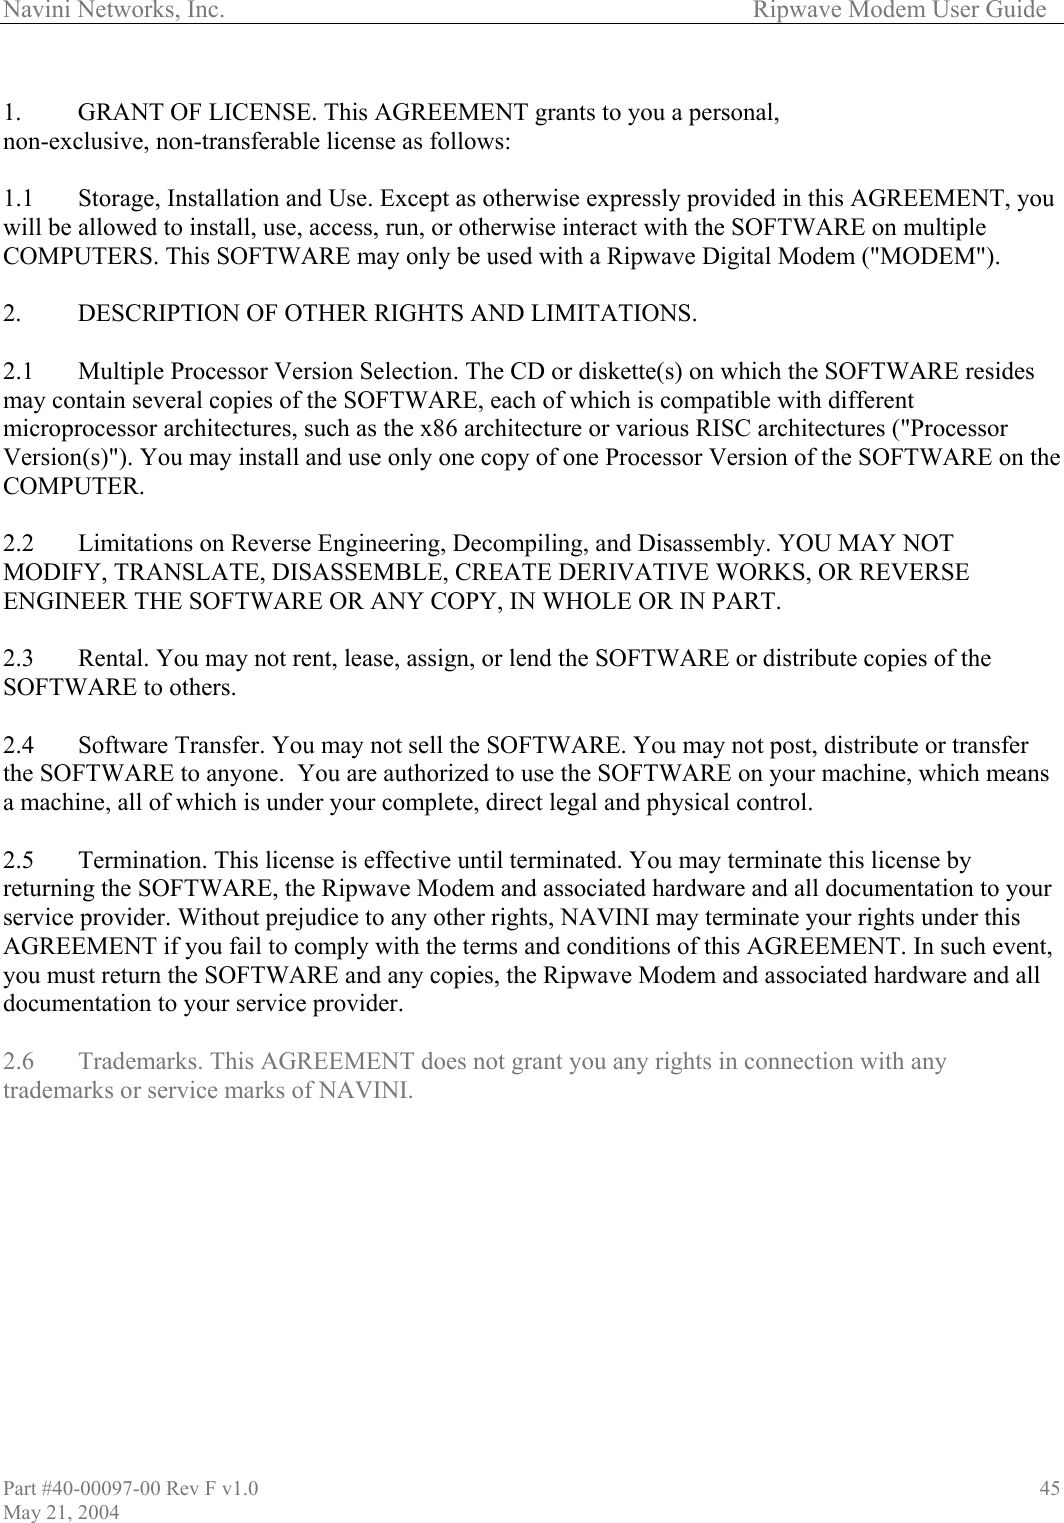 Navini Networks, Inc.        Ripwave Modem User Guide  1.  GRANT OF LICENSE. This AGREEMENT grants to you a personal,  non-exc 1.1  Storage, Installation and Use.  rovided in this AGREEMENT, you ill be allowed to install, use, access, the SOFTWARE on multiple l Modem (&quot;MODEM&quot;). ides e IVE WORKS, OR REVERSE r uch event, ware and all  AGREEMENT does not grant you any rights in connection with any lusive, non-transferable license as follows:  Except as otherwise expressly p run, or otherwise interact with wCOMPUTERS. This SOFTWARE may only be used with a Ripwave Digita 2.   DESCRIPTION OF OTHER RIGHTS AND LIMITATIONS.   2.1   Multiple Processor Version Selection. The CD or diskette(s) on which the SOFTWARE resmay contain several copies of the SOFTWARE, each of which is compatible with different microprocessor architectures, such as the x86 architecture or various RISC architectures (&quot;Processor Version(s)&quot;). You may install and use only one copy of one Processor Version of the SOFTWARE on thOMPUTER. C 2.2   Limitations on Reverse Engineering, Decompiling, and Disassembly. YOU MAY NOT ODIFY, TRANSLATE, DISASSEMBLE, CREATE DERIVATMENGINEER THE SOFTWARE OR ANY COPY, IN WHOLE OR IN PART.  2.3   Rental. You may not rent, lease, assign, or lend the SOFTWARE or distribute copies of the SOFTWARE to others.  2.4   Software Transfer. You may not sell the SOFTWARE. You may not post, distribute or transfer the SOFTWARE to anyone.  You are authorized to use the SOFTWARE on your machine, which means a machine, all of which is under your complete, direct legal and physical control.  2.5   Termination. This license is effective until terminated. You may terminate this license by returning the SOFTWARE, the Ripwave Modem and associated hardware and all documentation to youservice provider. Without prejudice to any other rights, NAVINI may terminate your rights under this AGREEMENT if you fail to comply with the terms and conditions of this AGREEMENT. In syou must return the SOFTWARE and any copies, the Ripwave Modem and associated harddocumentation to your service provider.  .6  Trademarks. This2trademarks or service marks of NAVINI.  Part #40-00097-00 Rev F v1.0 May 21, 2004 45